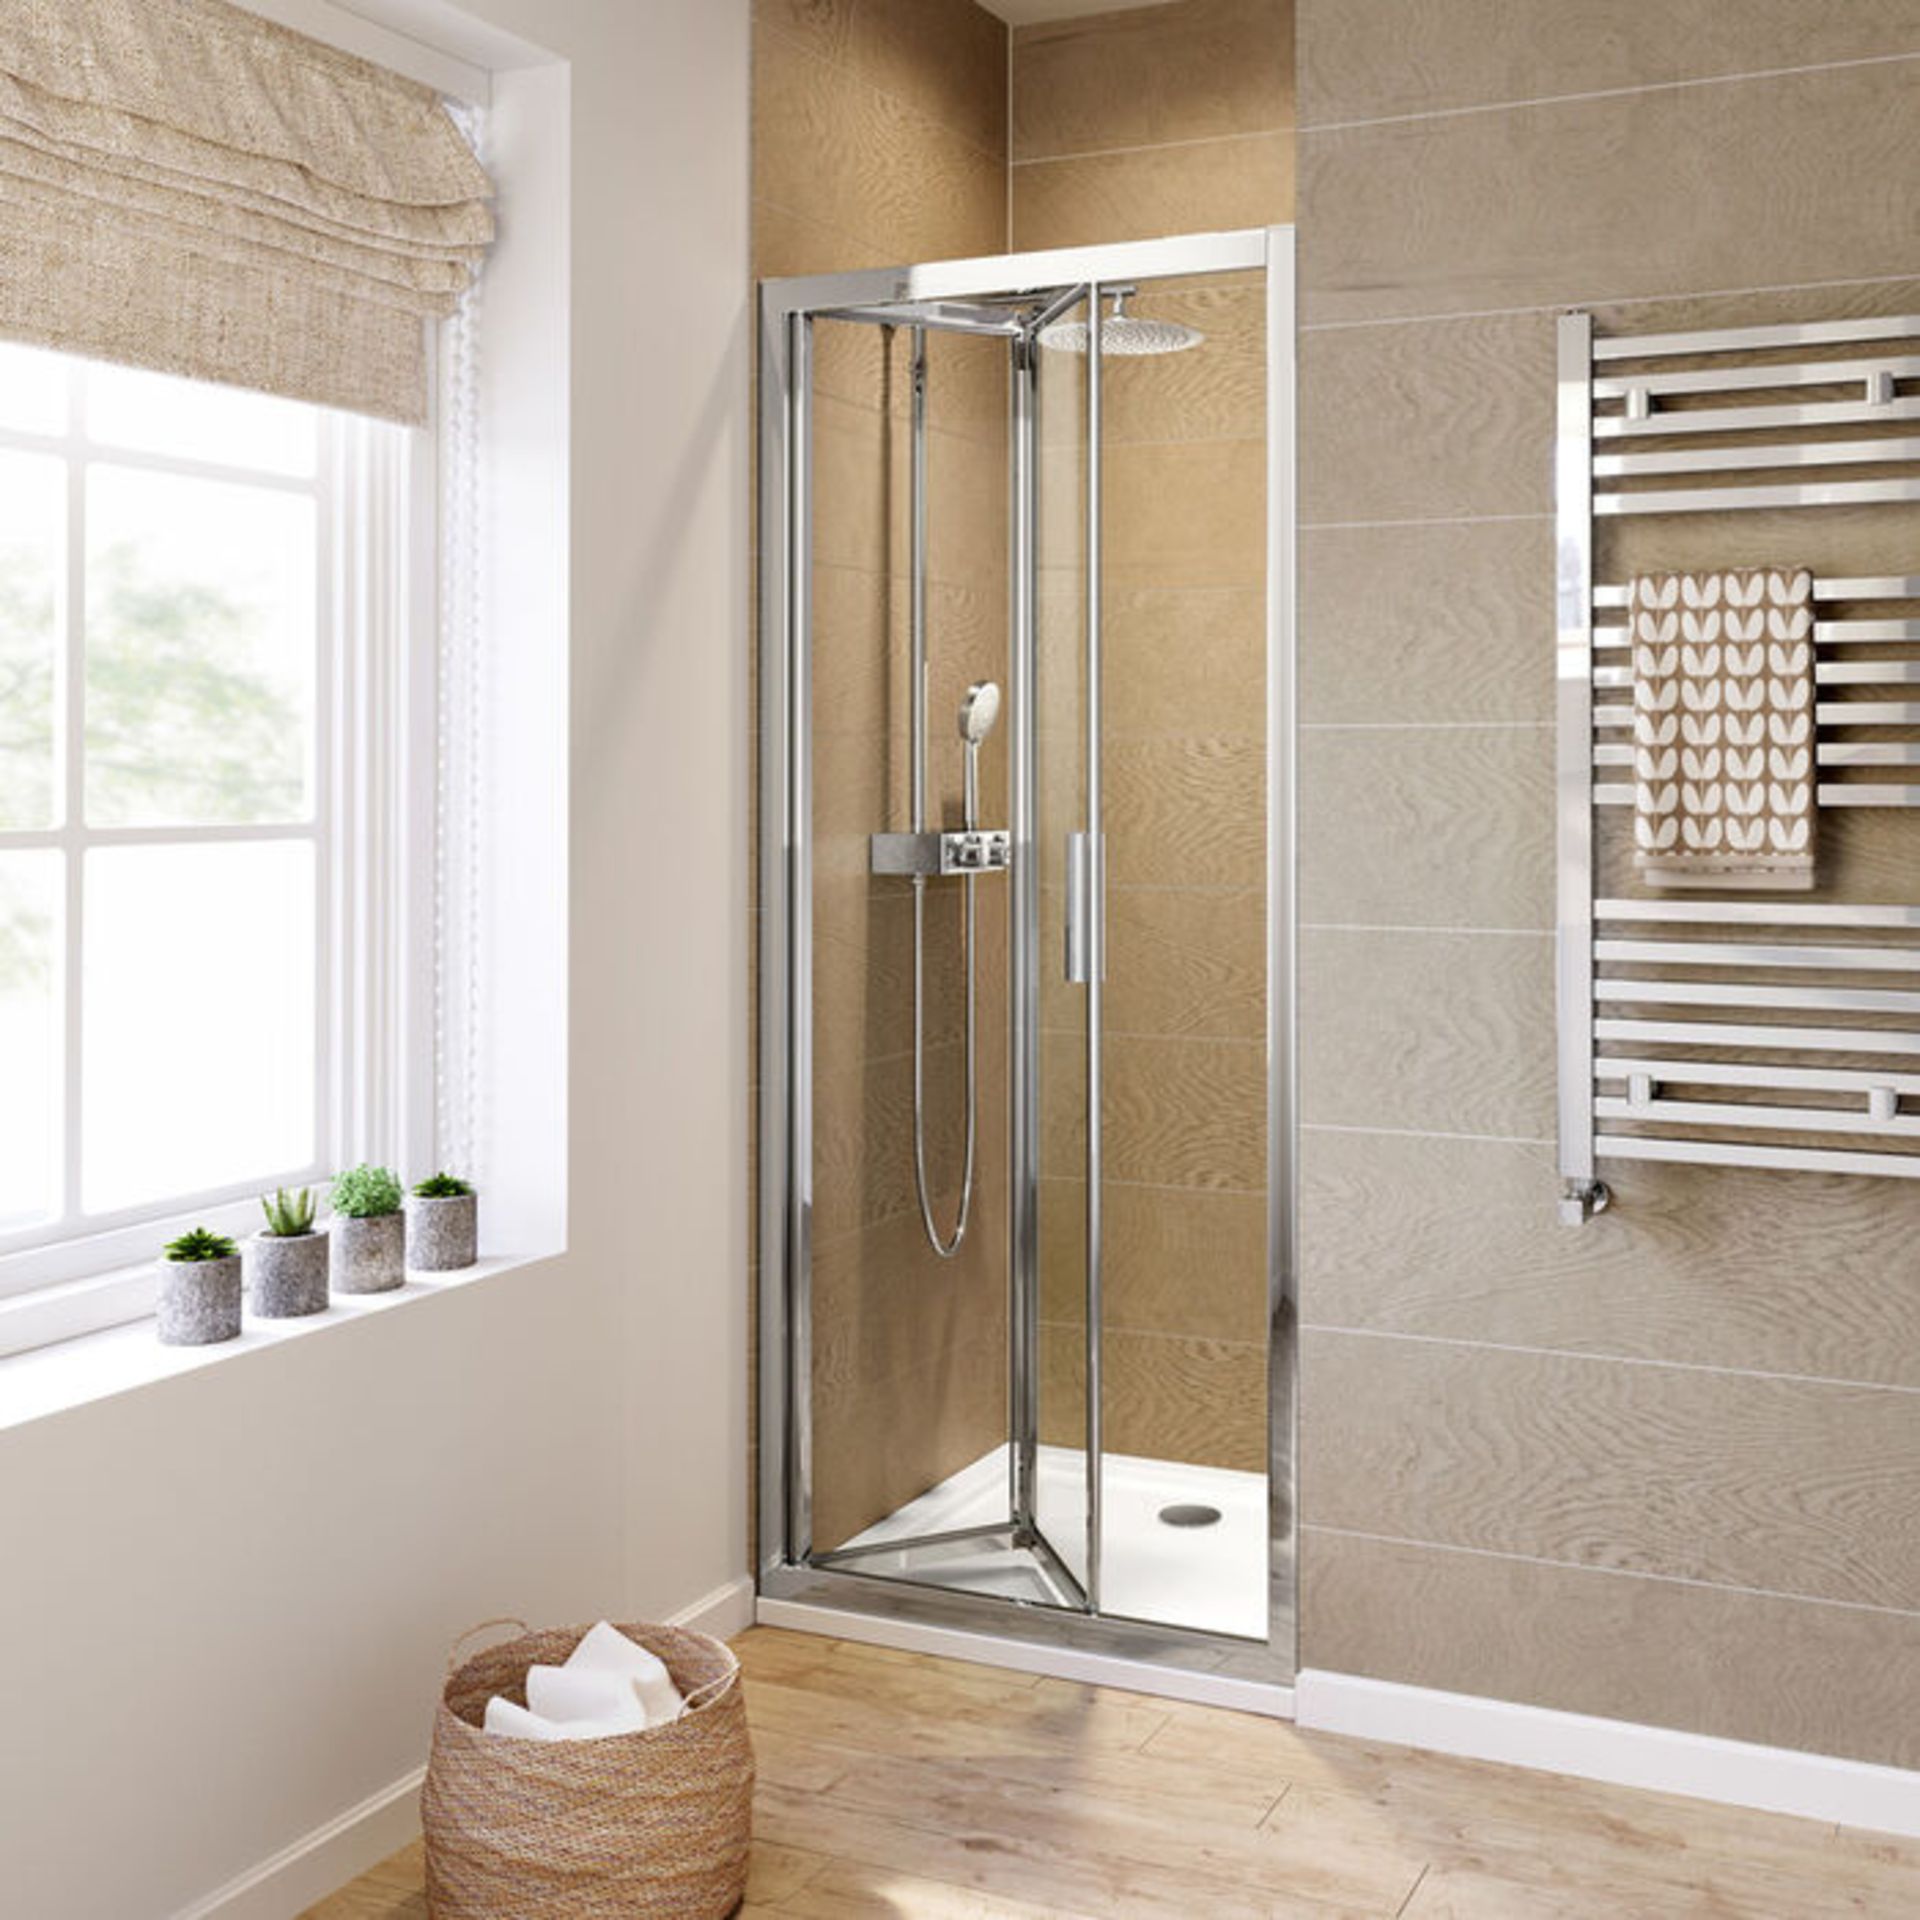 (H95) 800mm - 6mm - Elements EasyClean Bifold Shower Door. RRP £299.99. mm Safety Glass - Sing... - Image 3 of 5